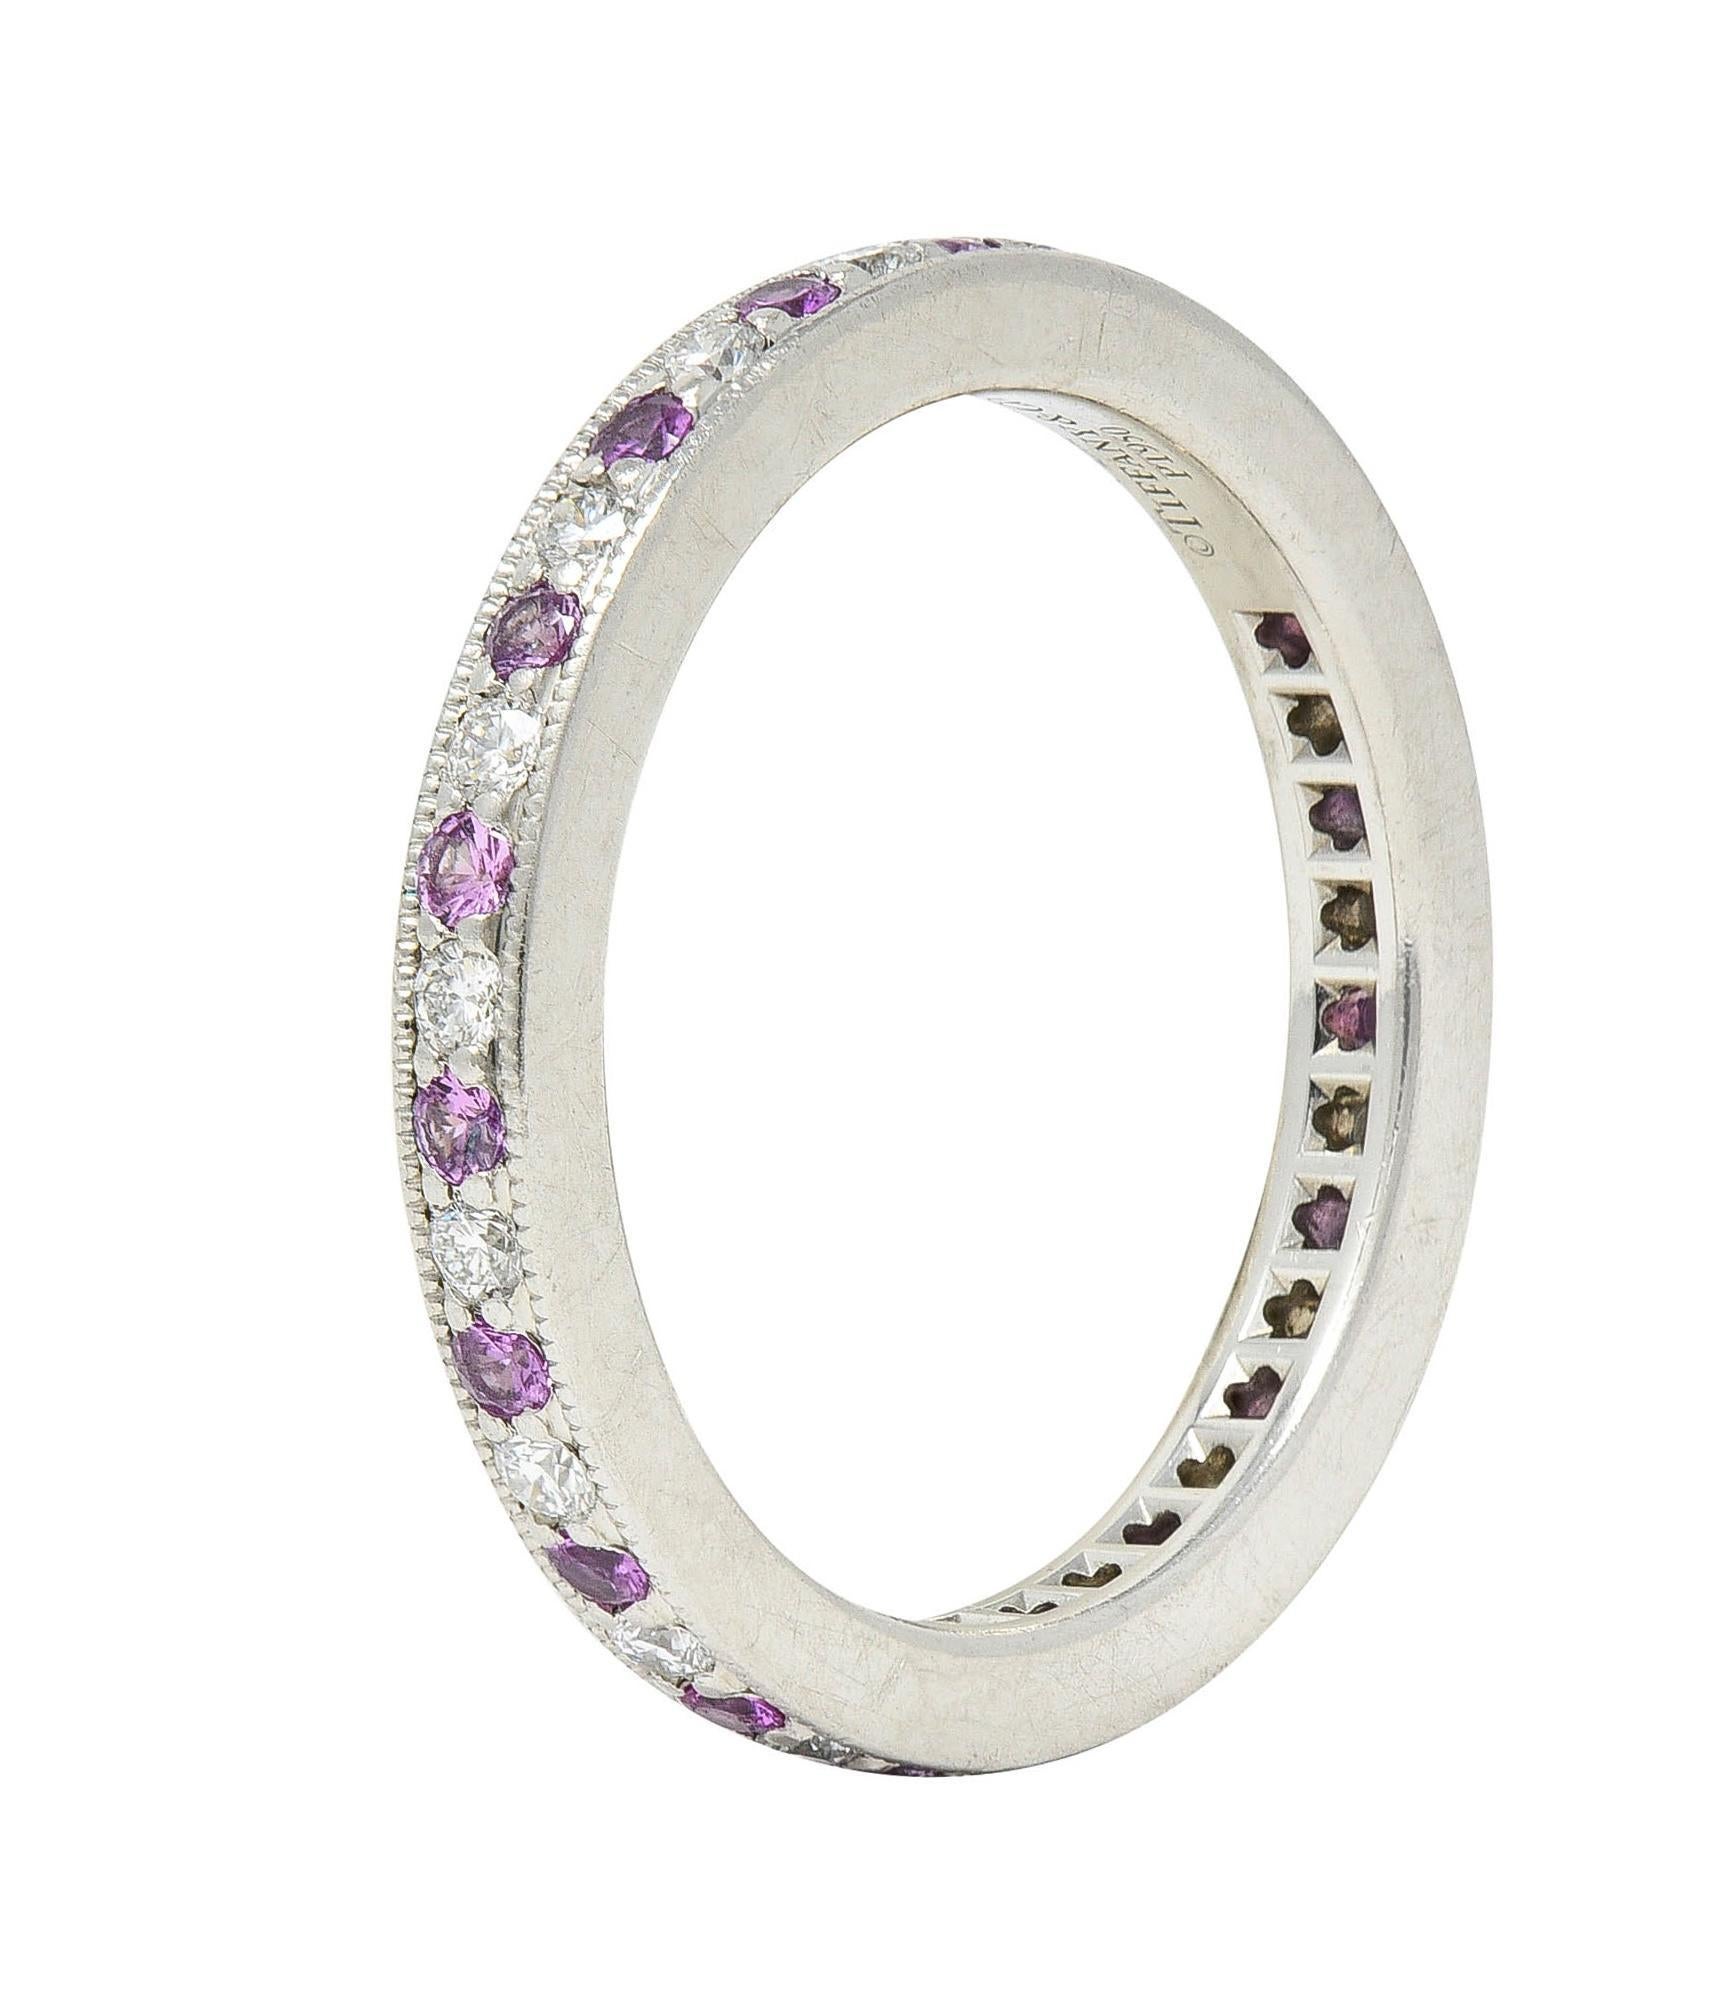 Bead set with diamonds and pink sapphires alternating in pattern fully around 
Diamonds weigh approximately 0.19 carat total - eye clean and bright
Sapphires are medium pink and weigh approximately 0.26 carat total
Accented by milgrain edges
Stamped